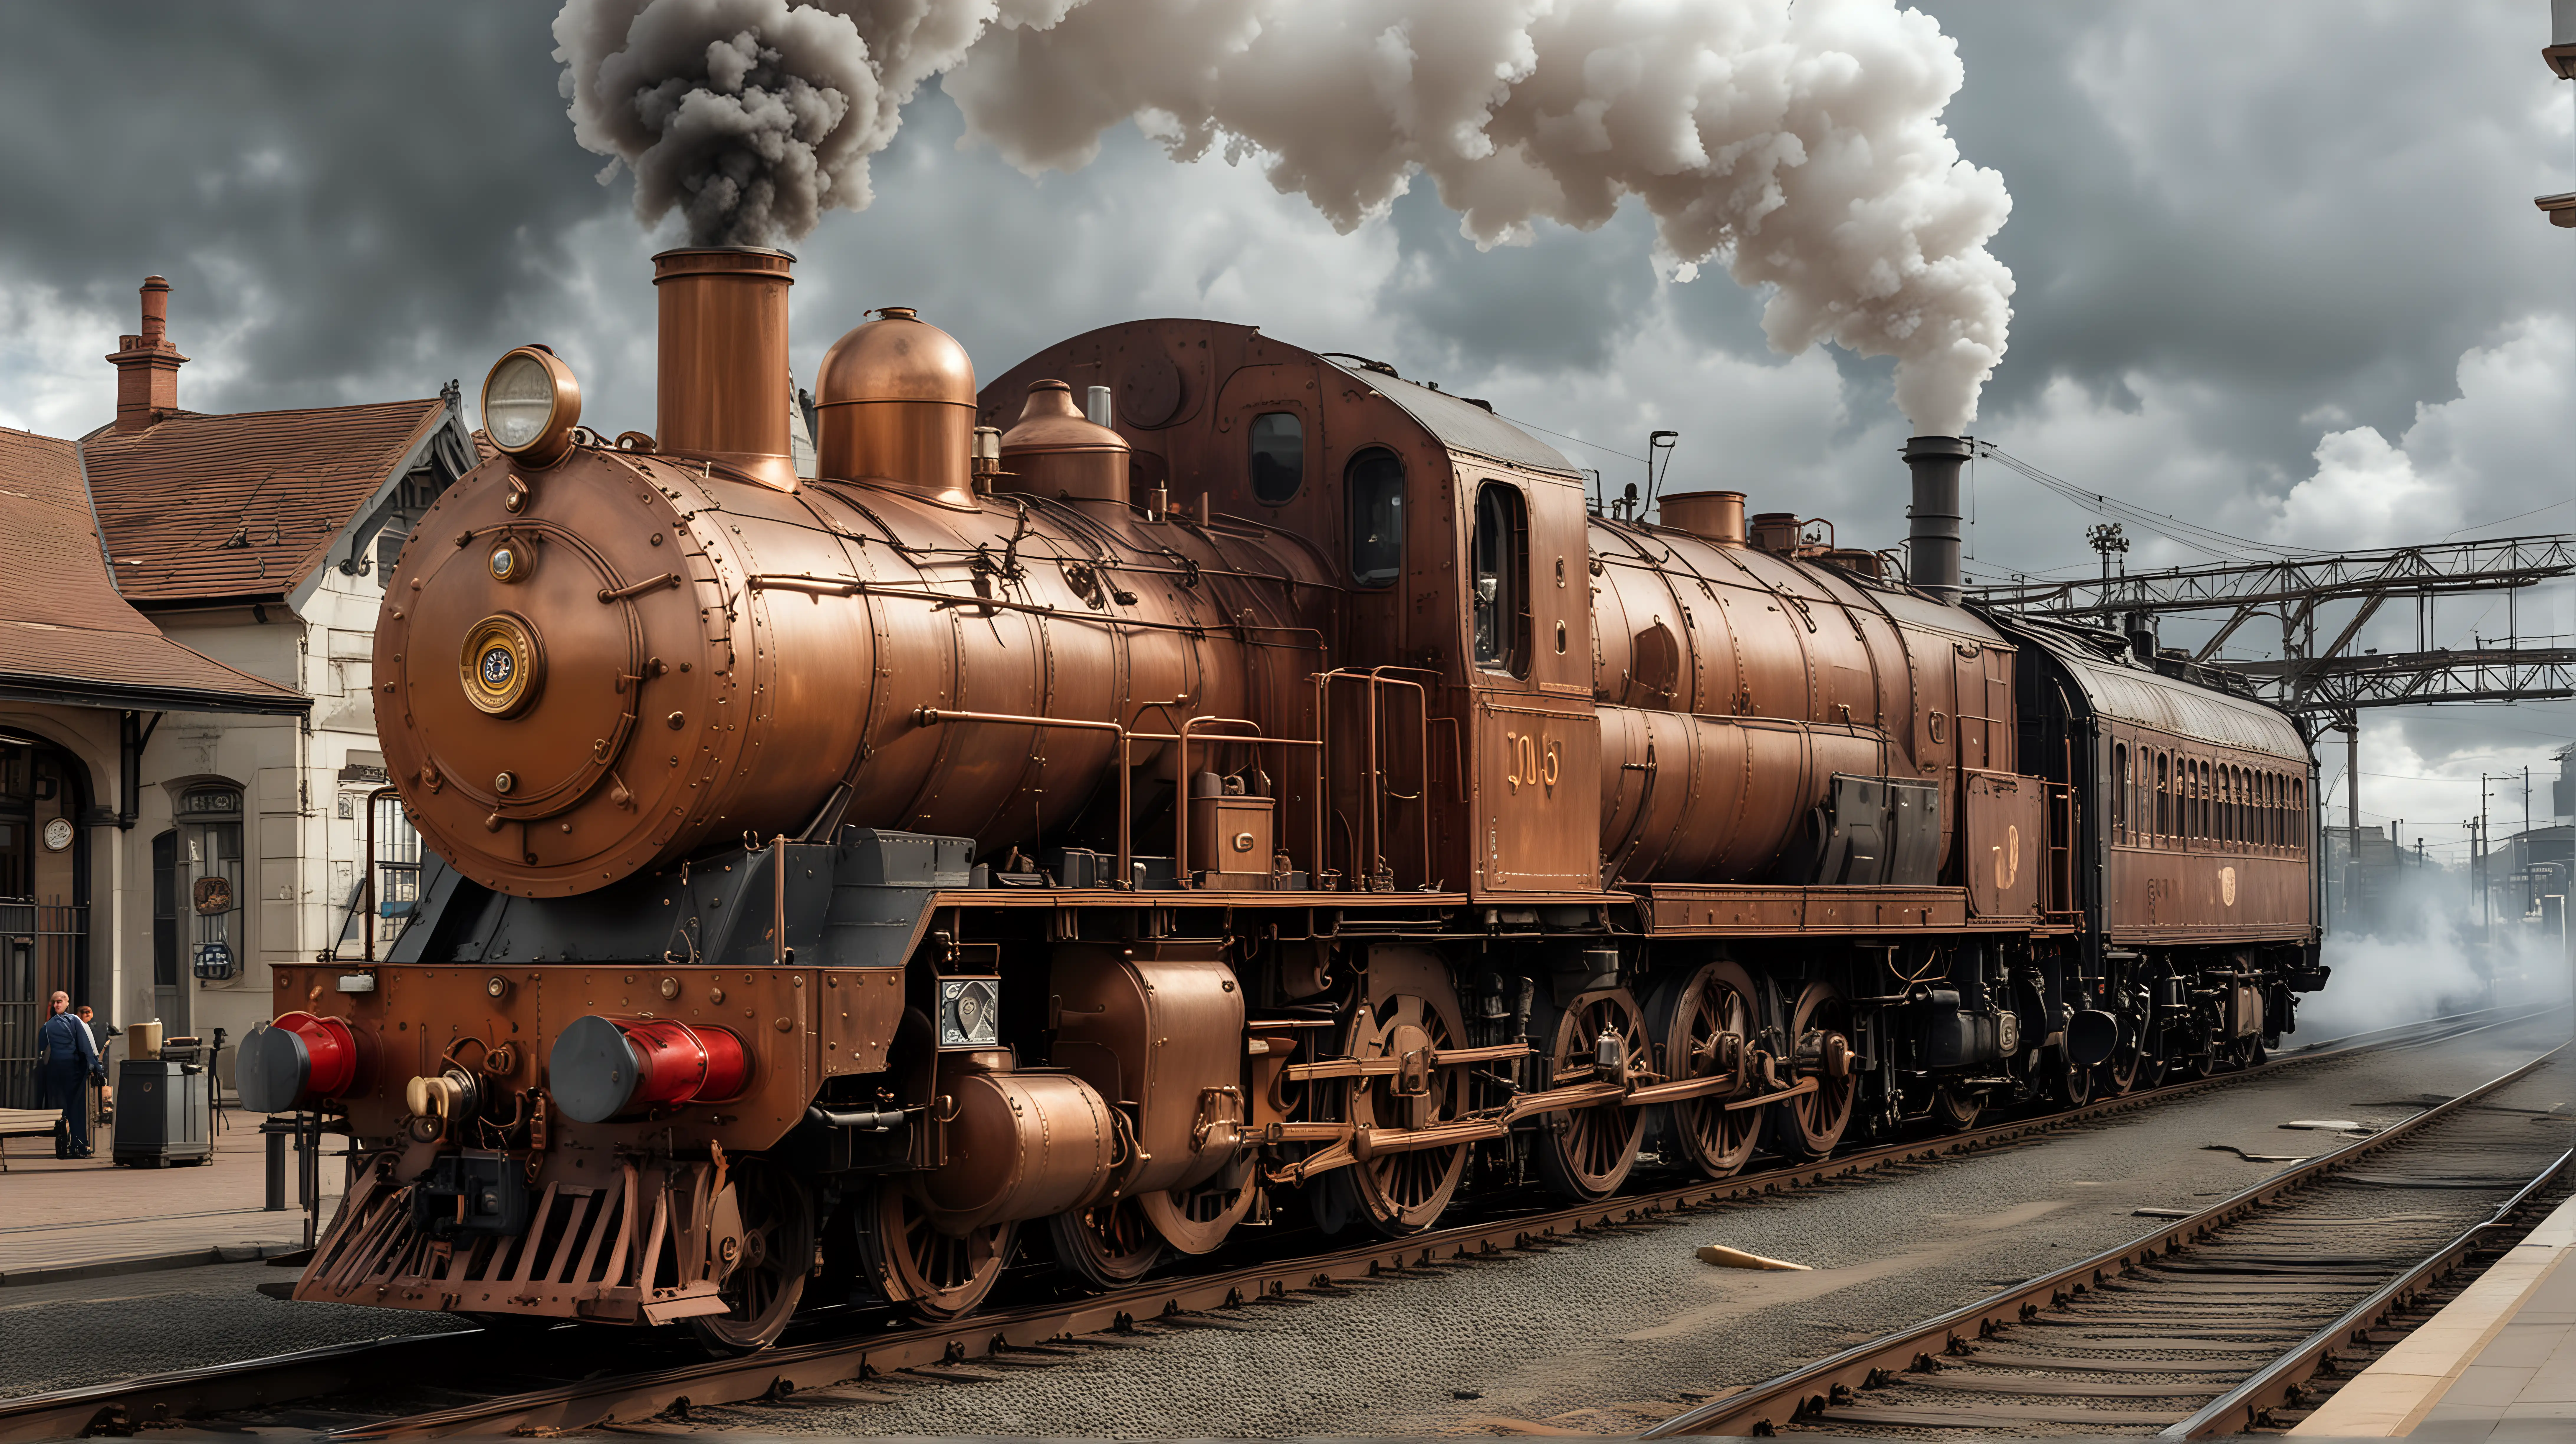 A very big steampunk diesel locomotive waits near a semaphore waiting for entering a steampunk railway station, much steam and smoke, the locomotive is made of copper and brass, cloudy